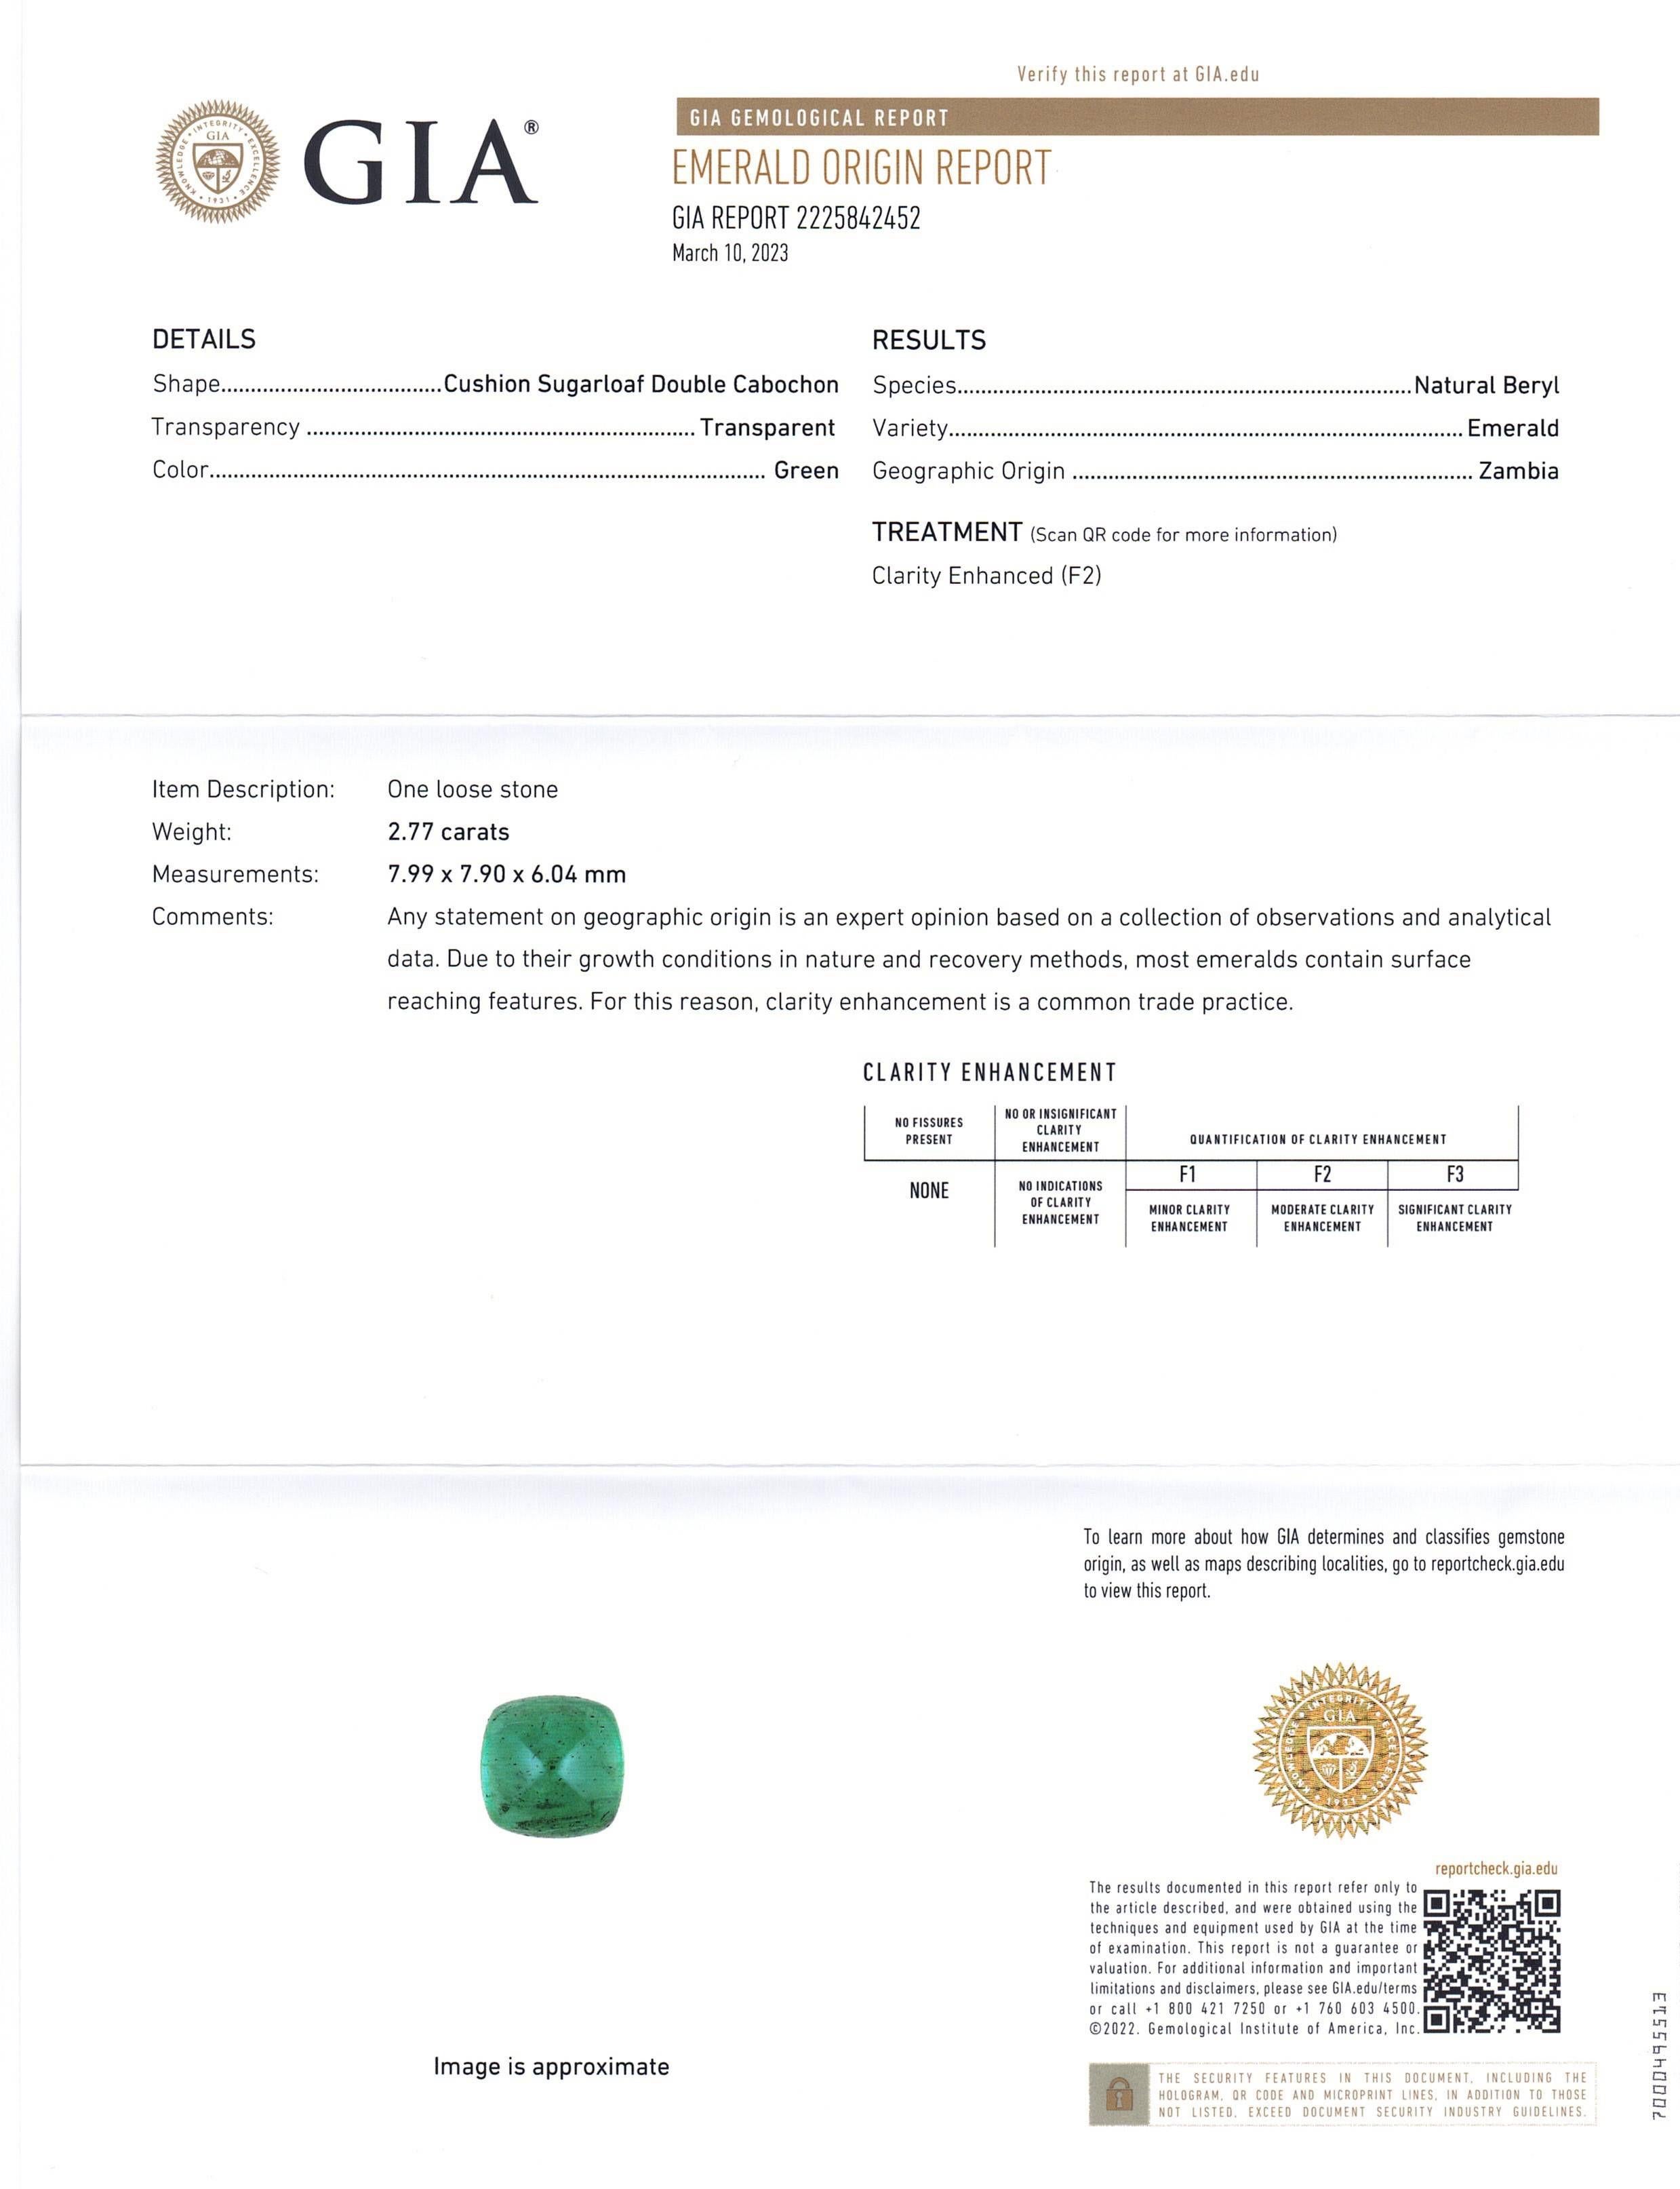 This is a stunning GIA Certified Emerald


The GIA report reads as follows:

GIA Report Number: 2225842452
Shape: Cushion Sugarloaf double Cabochon
Cutting Style:
Cutting Style: Crown:
Cutting Style: Pavilion:
Transparency: Transparent
Color: